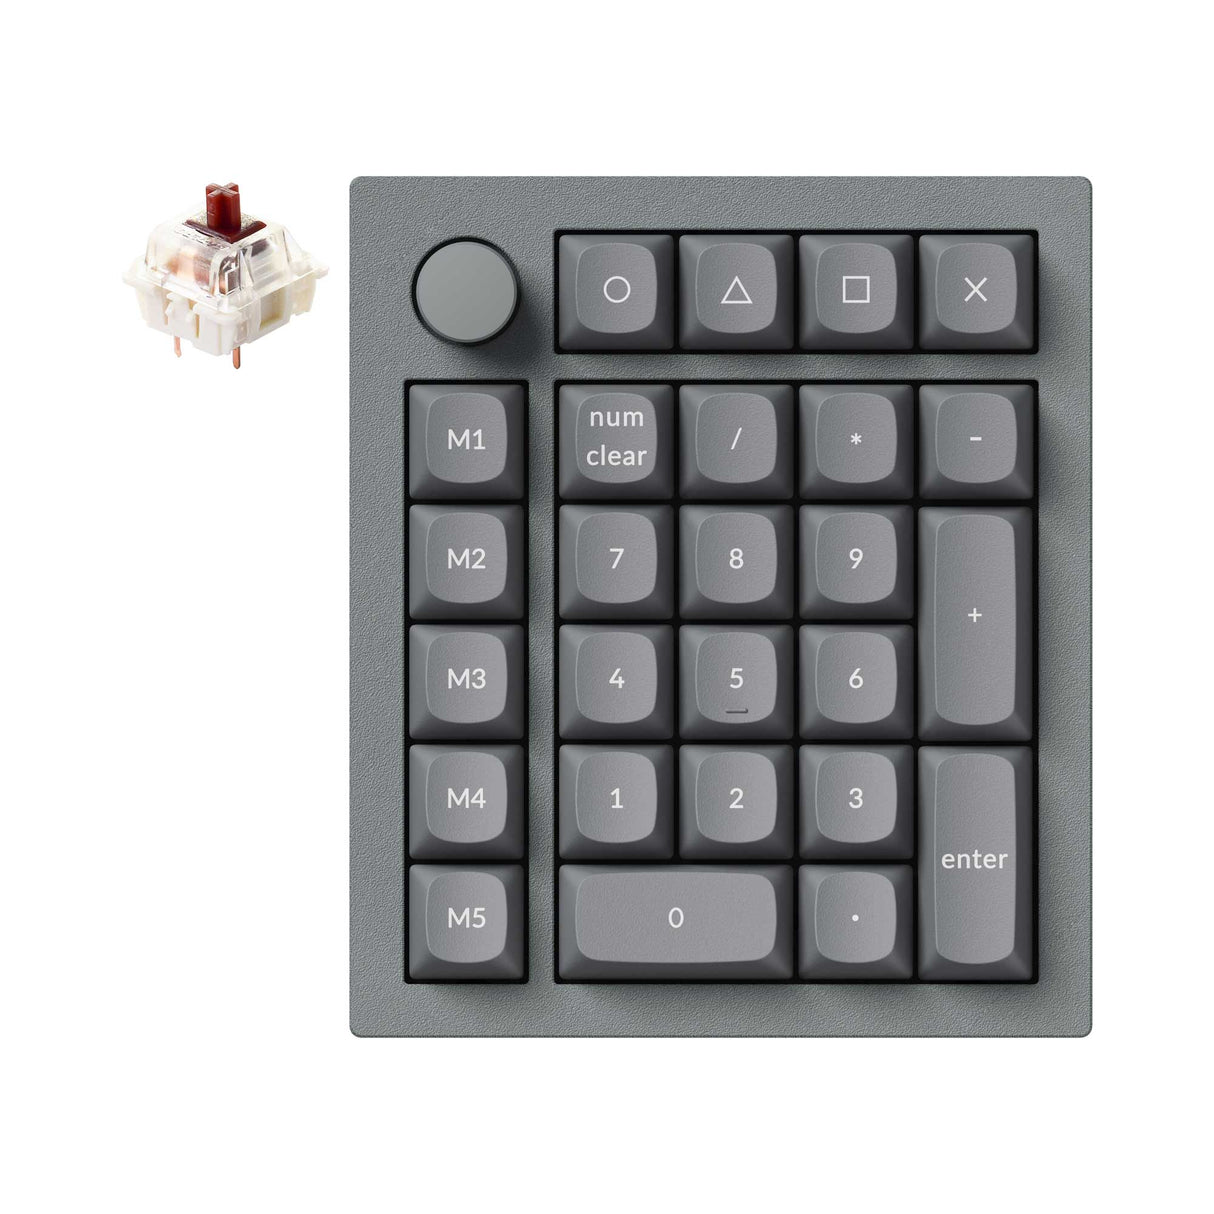 Keychron Q0 Plus QMK VIA custom number pad knob full aluminum grey frame for Mac Windows RGB backlight with hot swappable Gateron G Pro switch brown